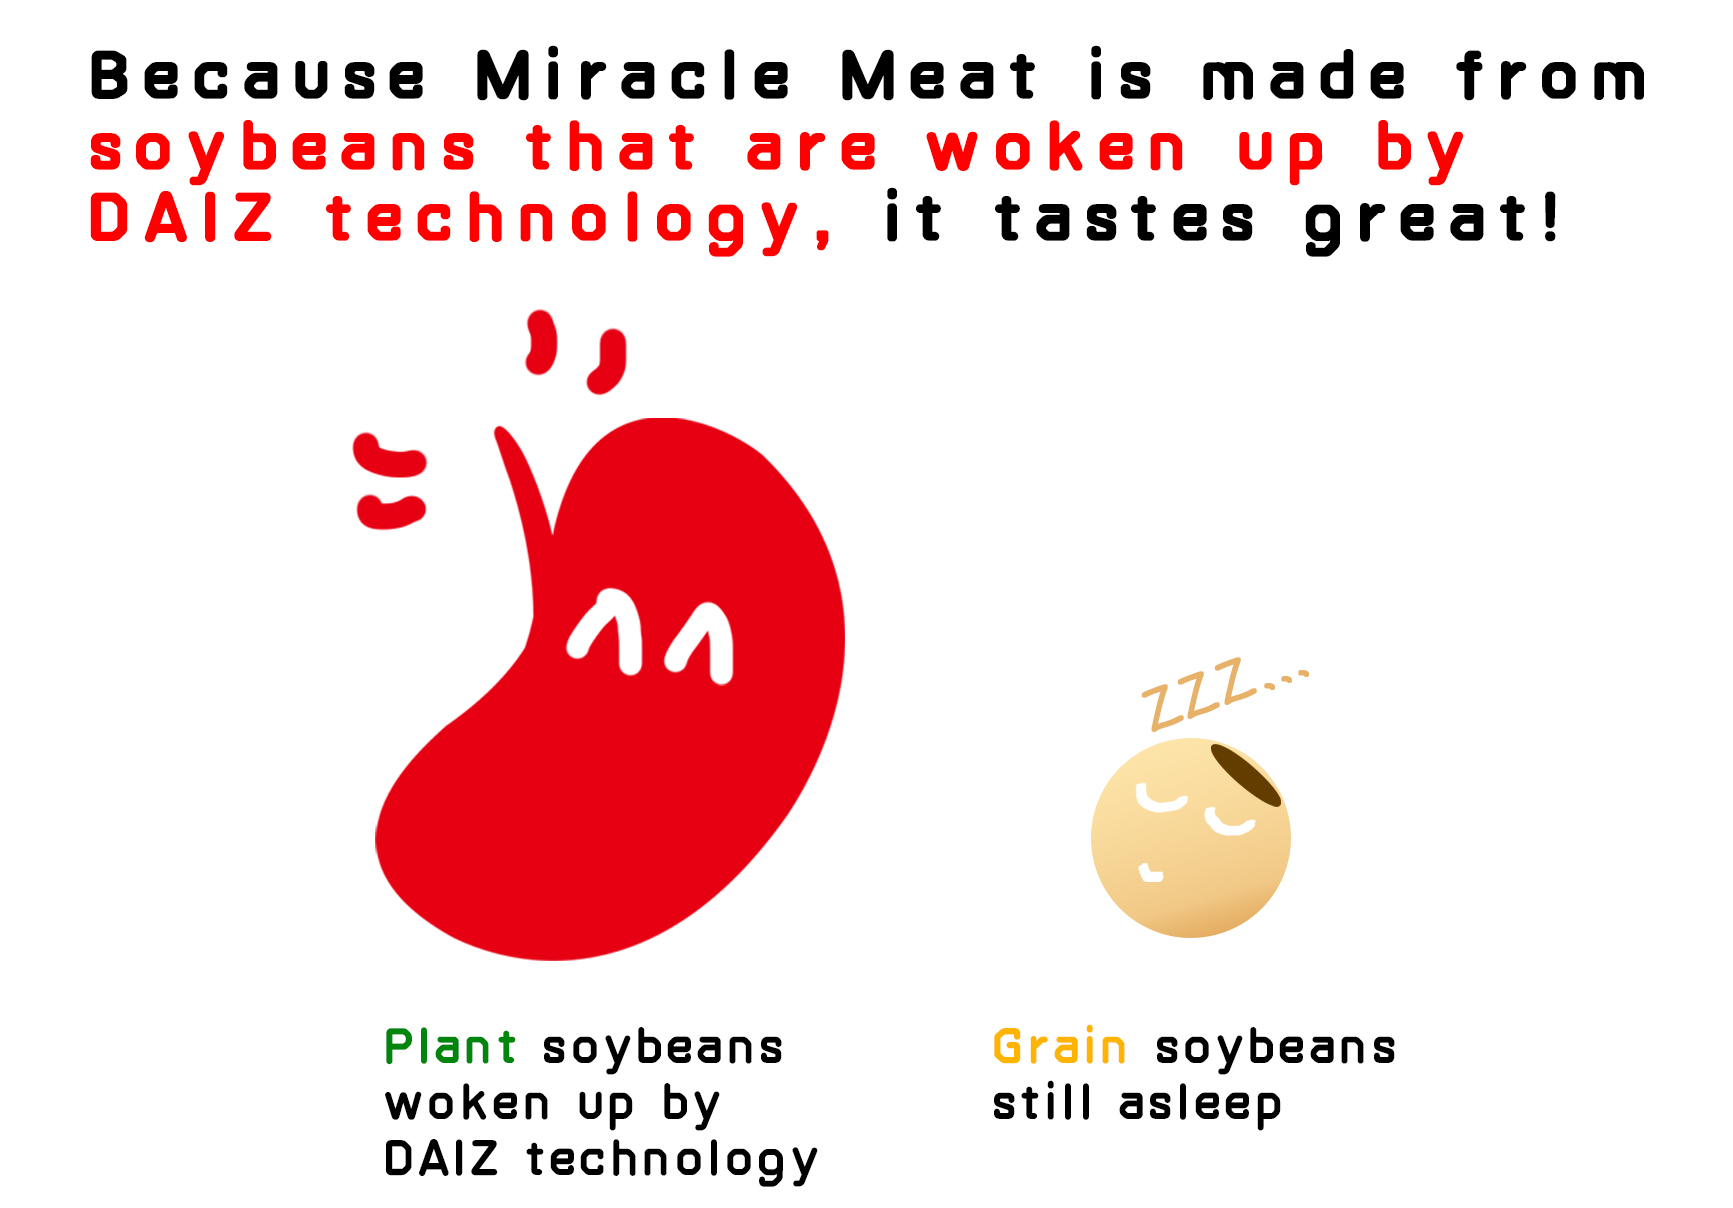 Because Miracle Meat is made from soybeans that are woken up by DAIZ technology, it tastes great!